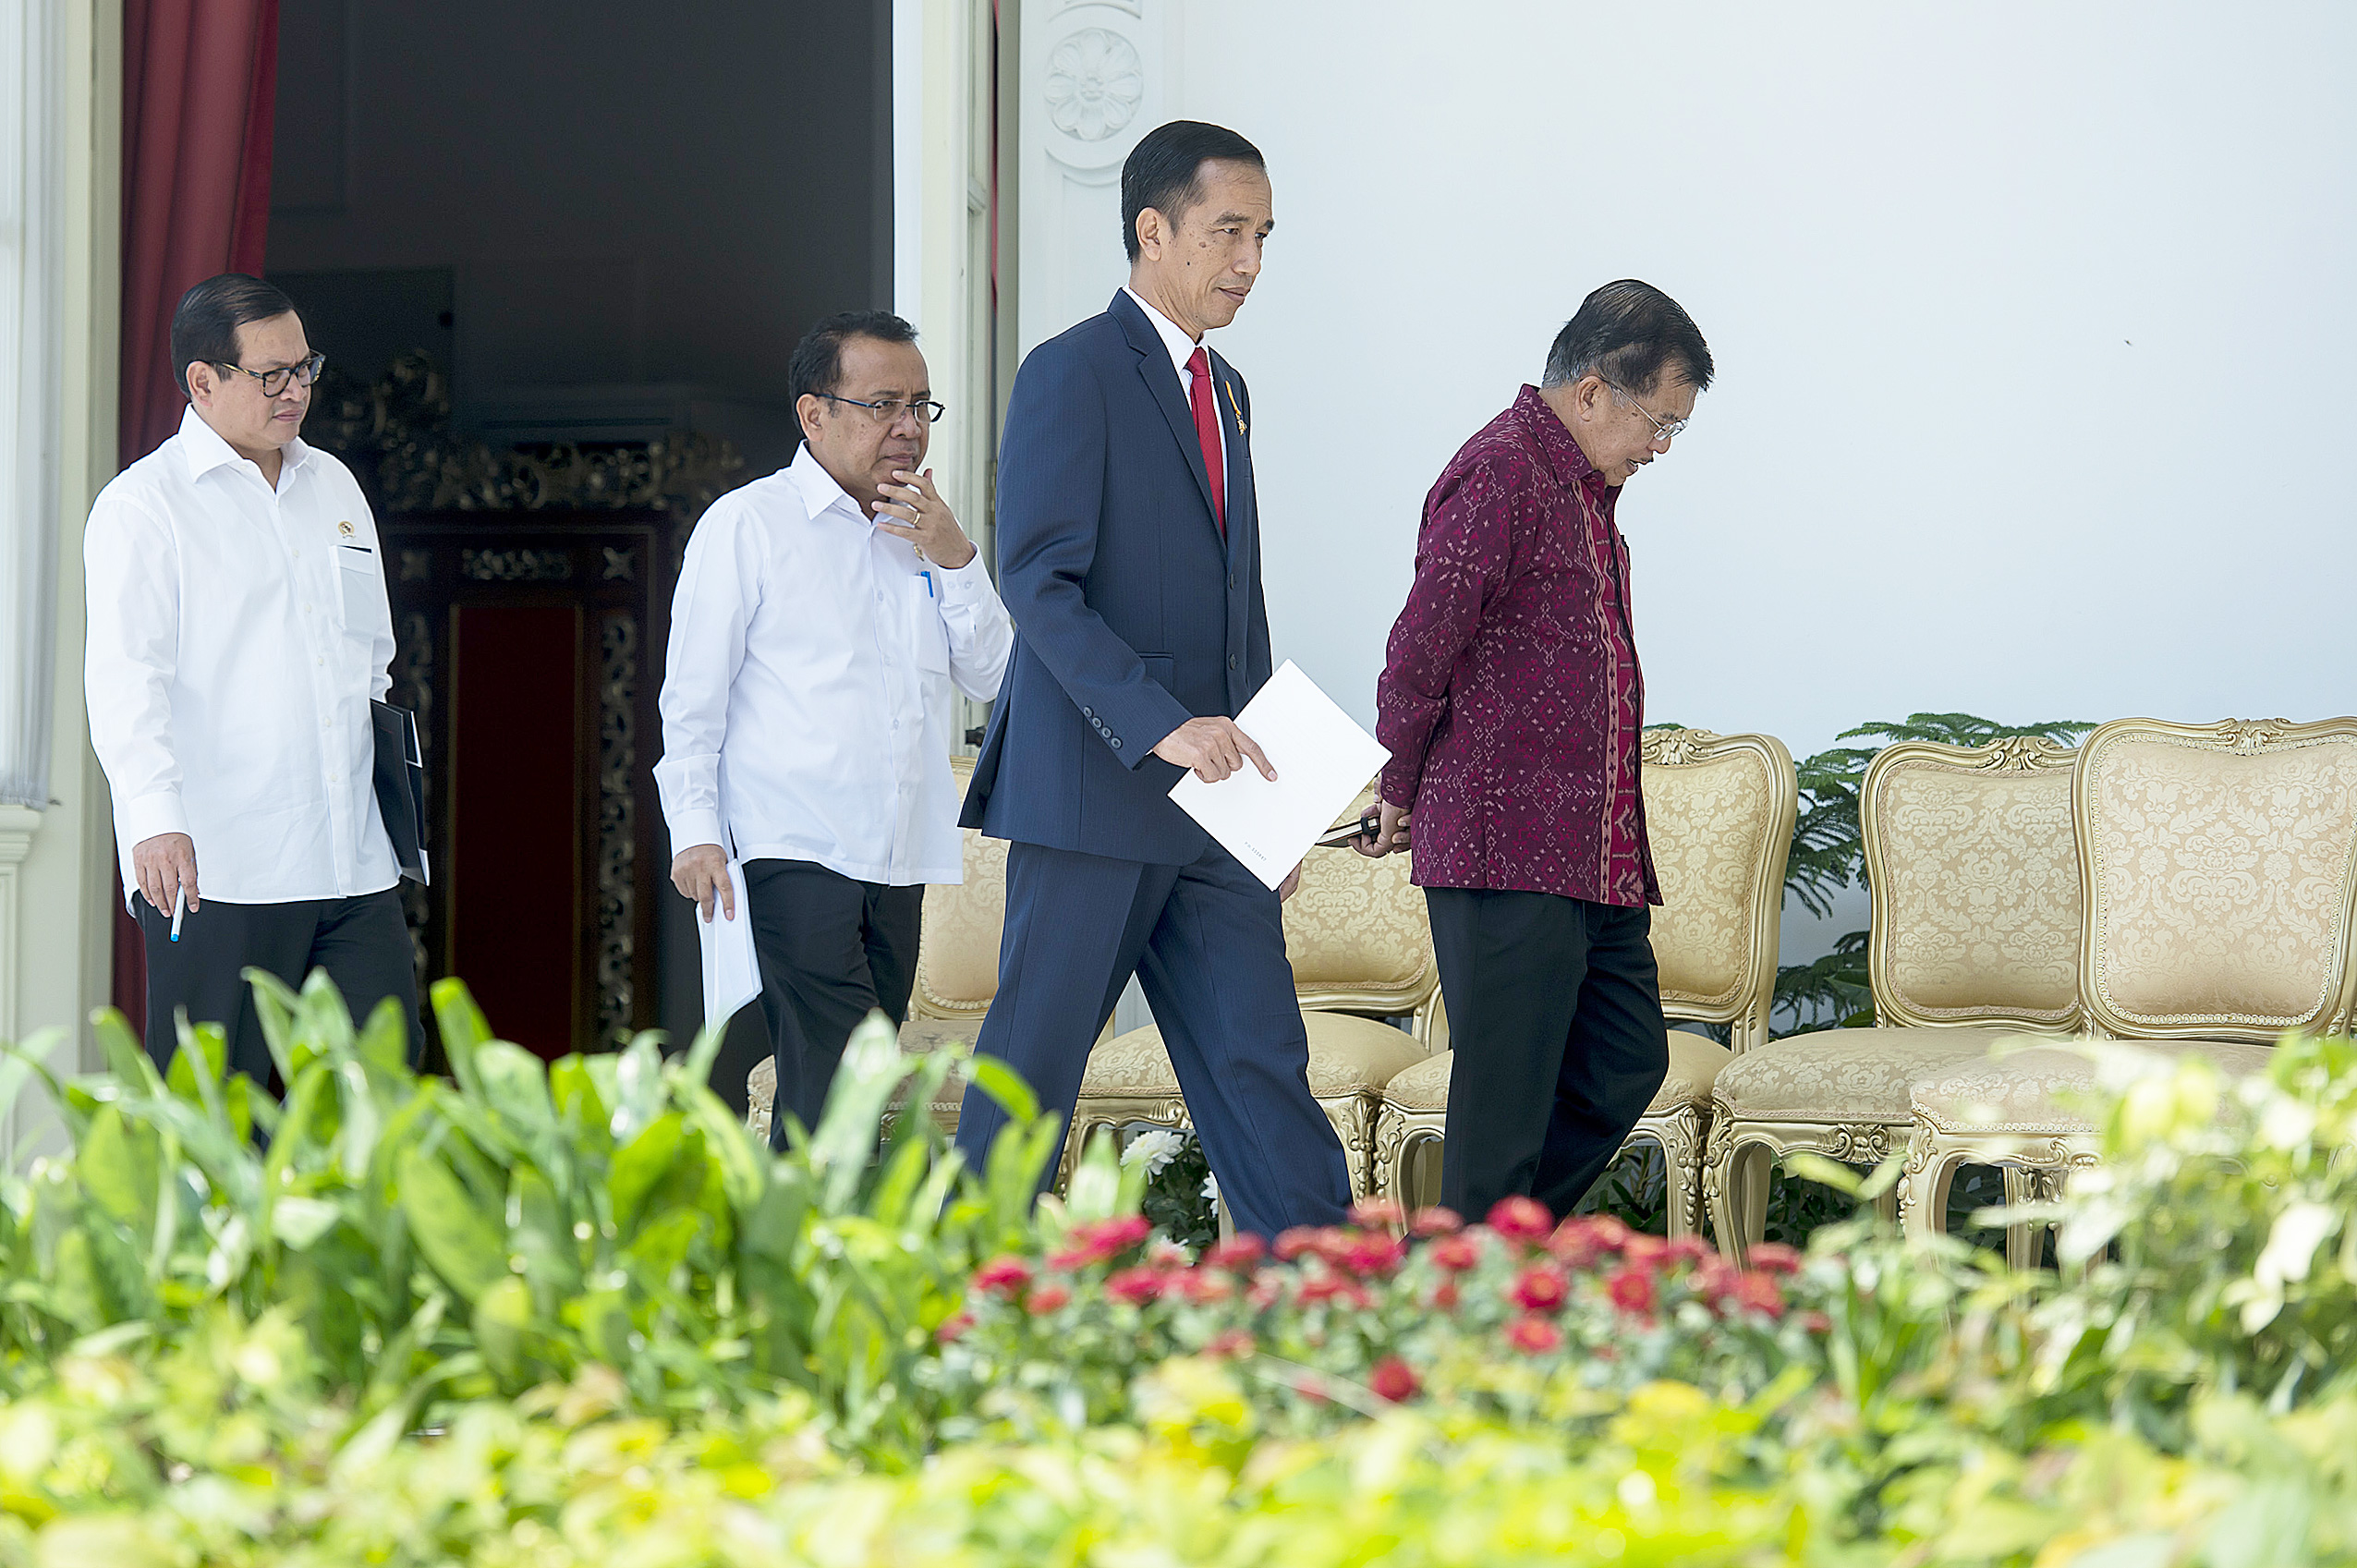 Bold steps: President Joko “Jokowi” Widodo (second from right), Vice President Jusuf Kalla (right), State Secretary Pratikno (second from left) and Cabinet Secretary Pramono Anung (left) walk to the stage where the President will announce the new line-up for his Cabinet. (Antara/Widodo S. Jusuf)